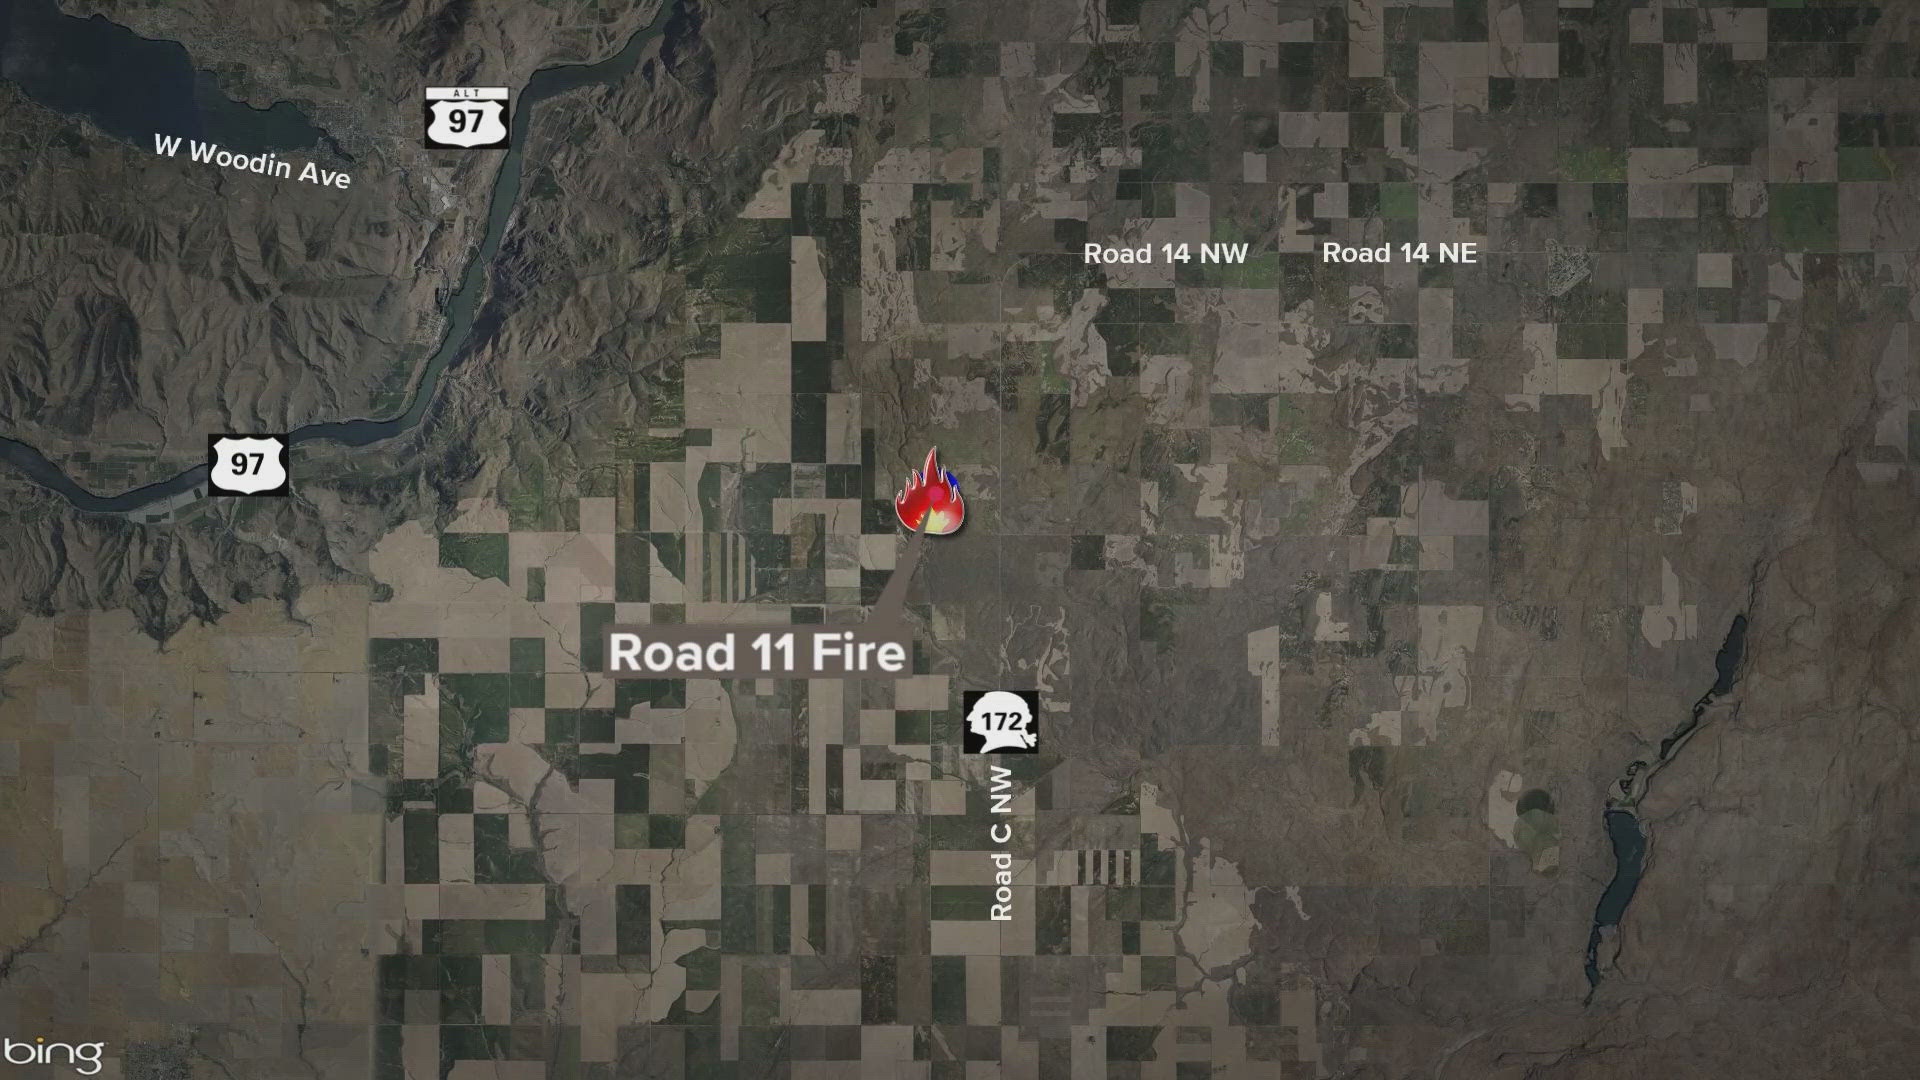 Douglas County has issued Level 2 (Set to Leave) evacuations due to a brush fire.